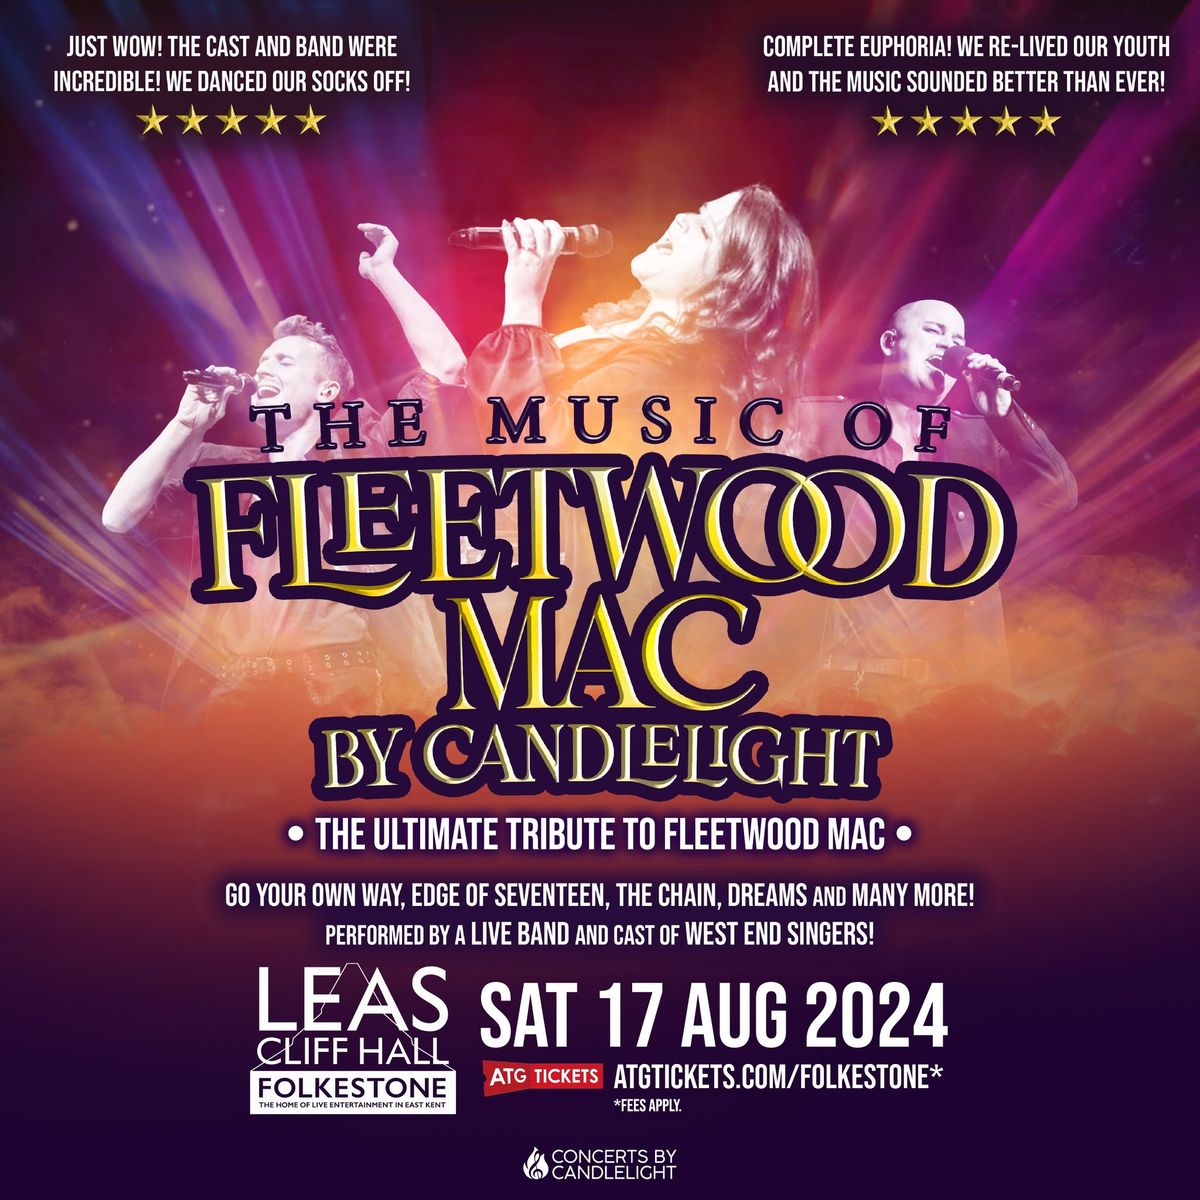 The Music Of Fleetwood Mac By Candlelight At Leas Cliff Hall, Folkestone